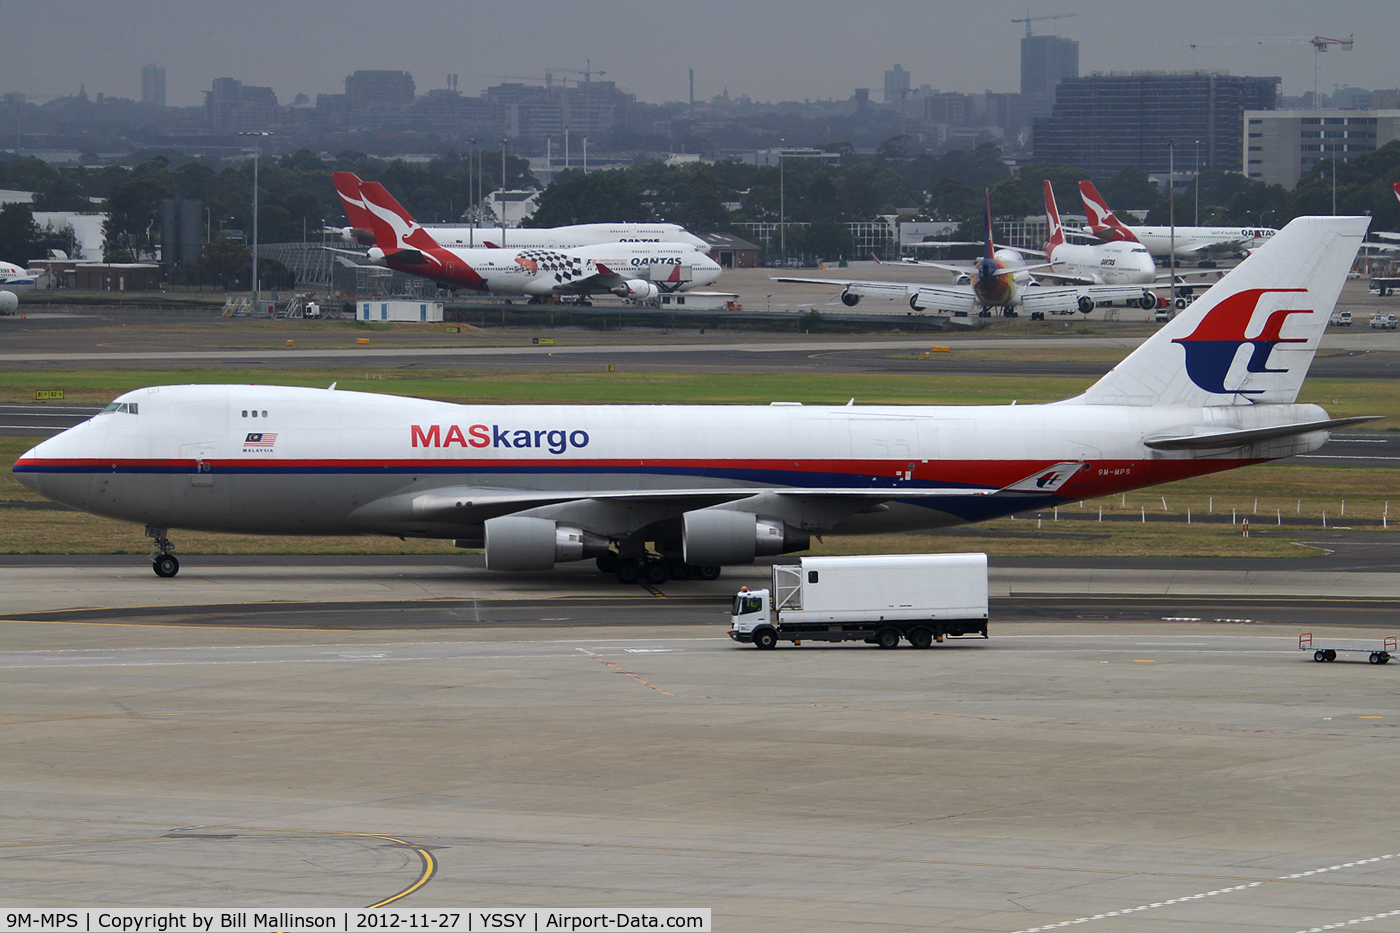 9M-MPS, 2006 Boeing 747-4H6F C/N 29902, taxiing to Cargo area